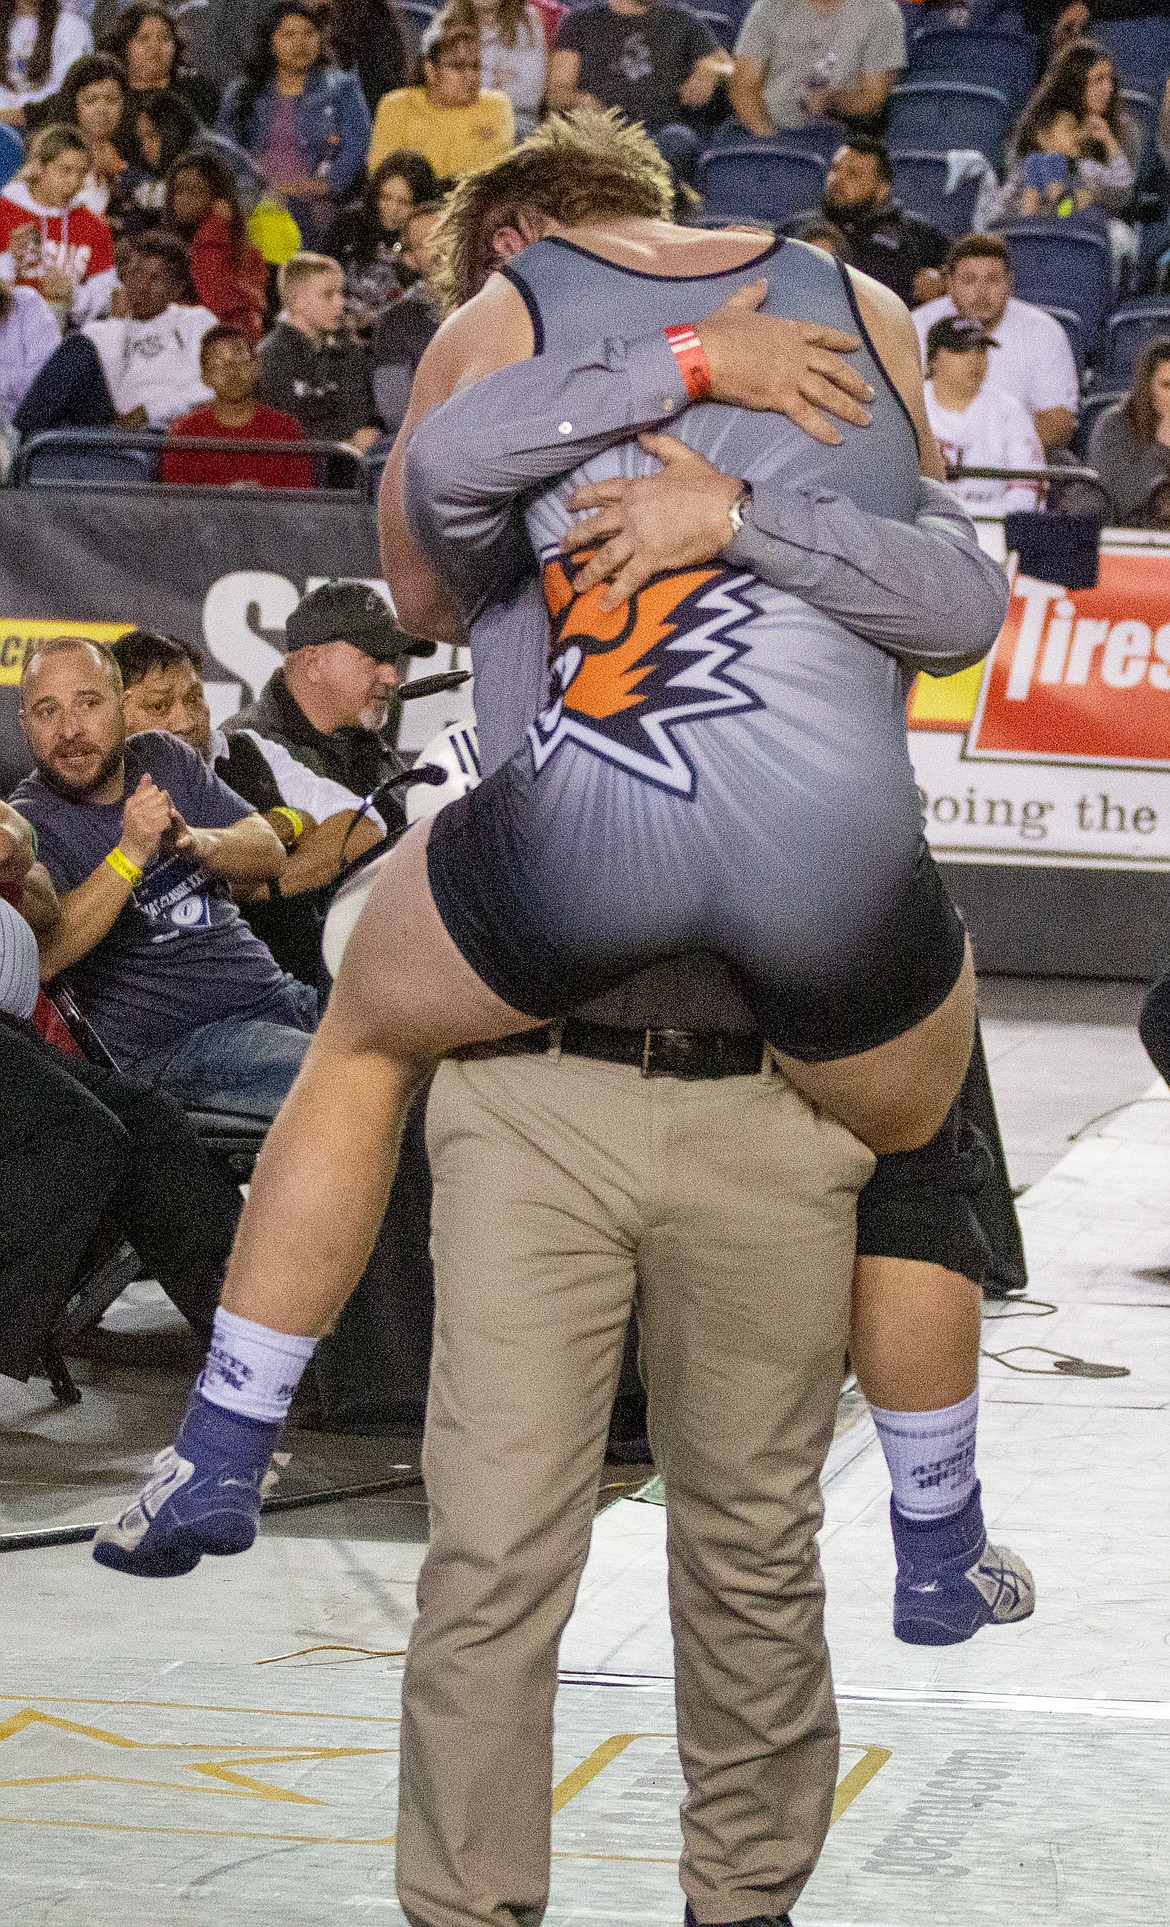 Casey McCarthy/Columbia Basin Herald Mac Laird leaps into the arms of his dad and assistant coach, David, after winning the 2A state championship at 195 at Mat Classic XXXII in Tacoma.